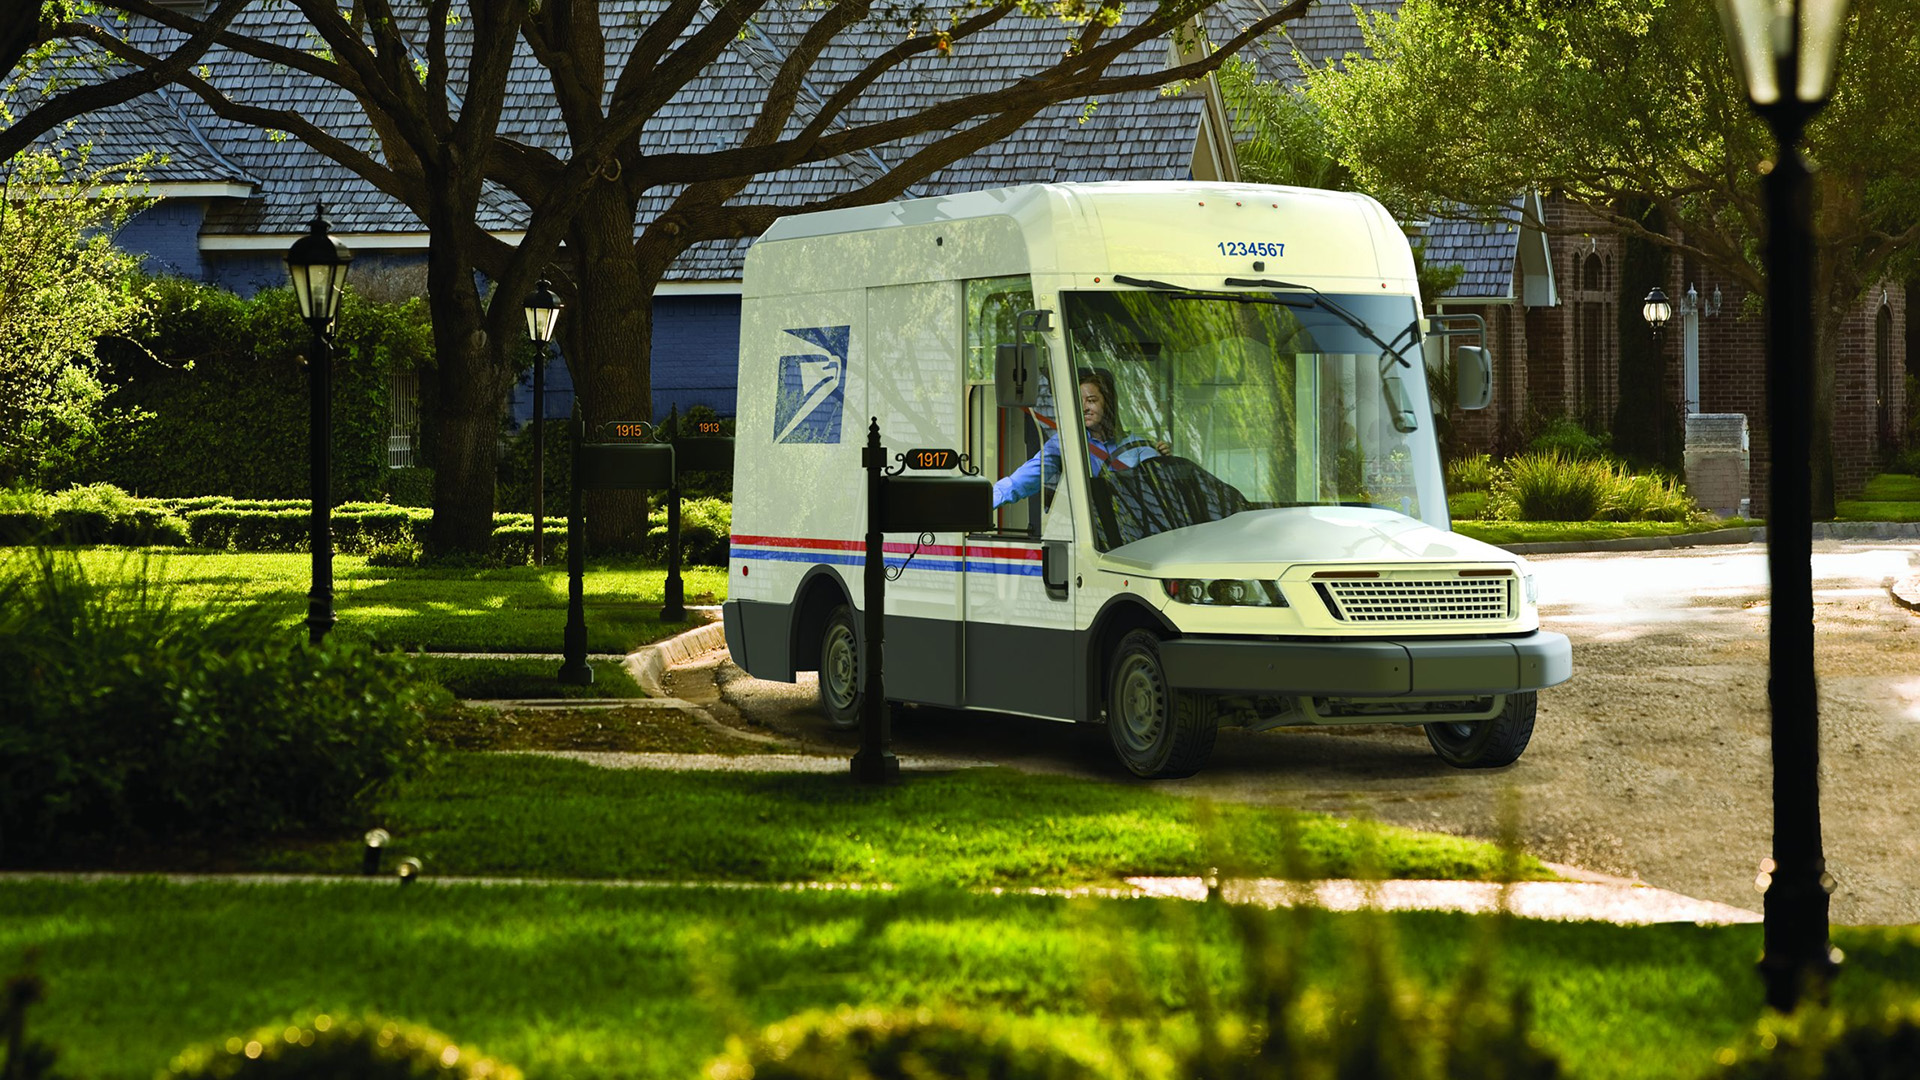 An illustration shows a design for a U.S. Postal Service delivery truck on a street scape with mail boxes, street lights, trees and houses.